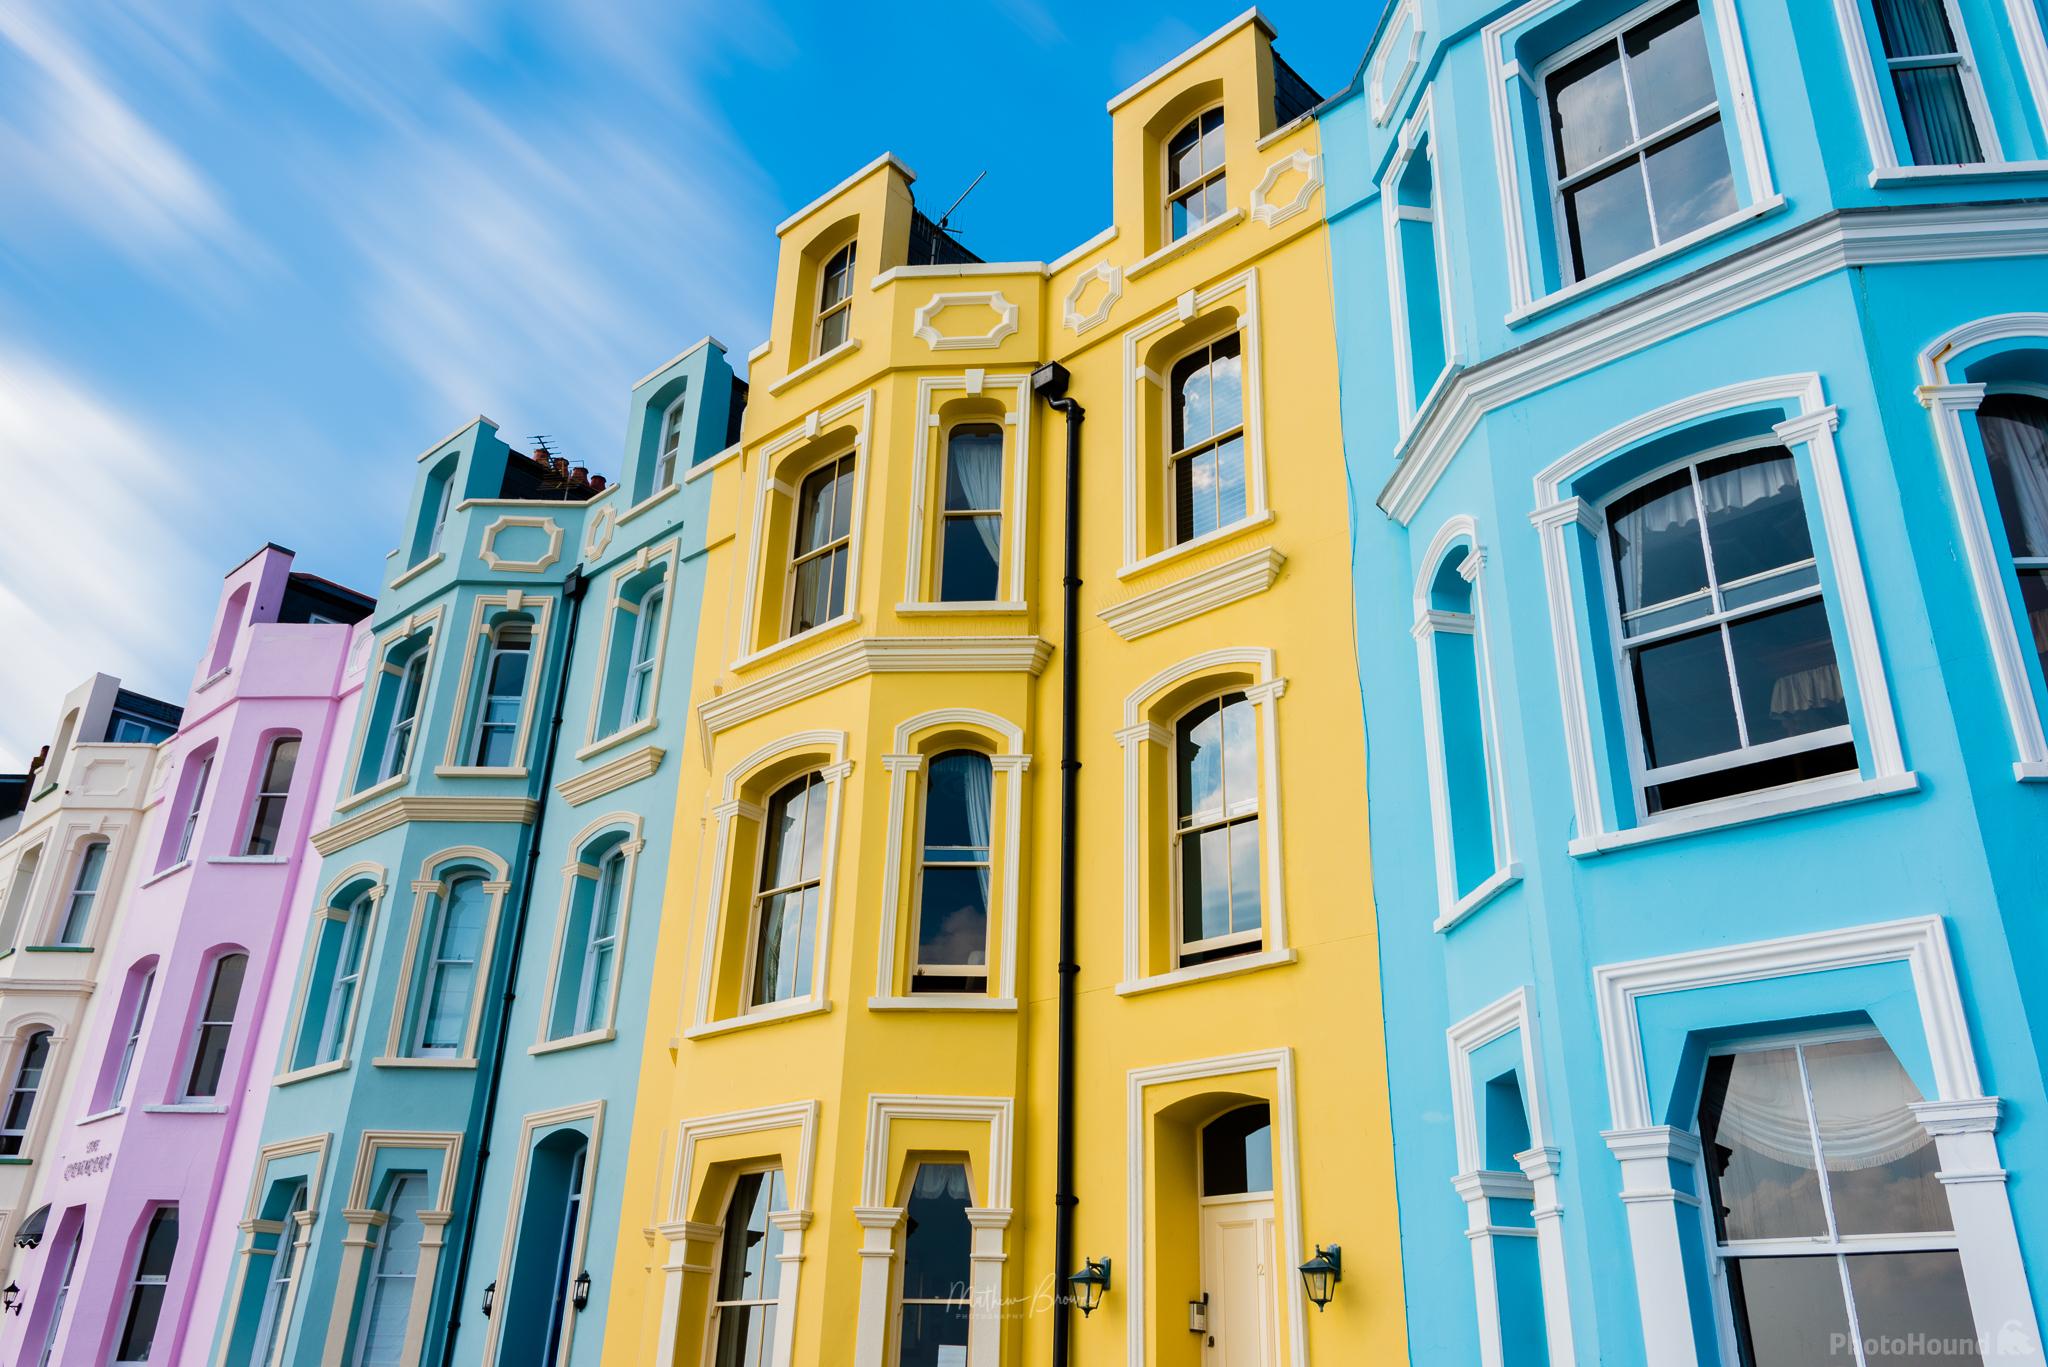 Image of Pastel Houses by Mathew Browne